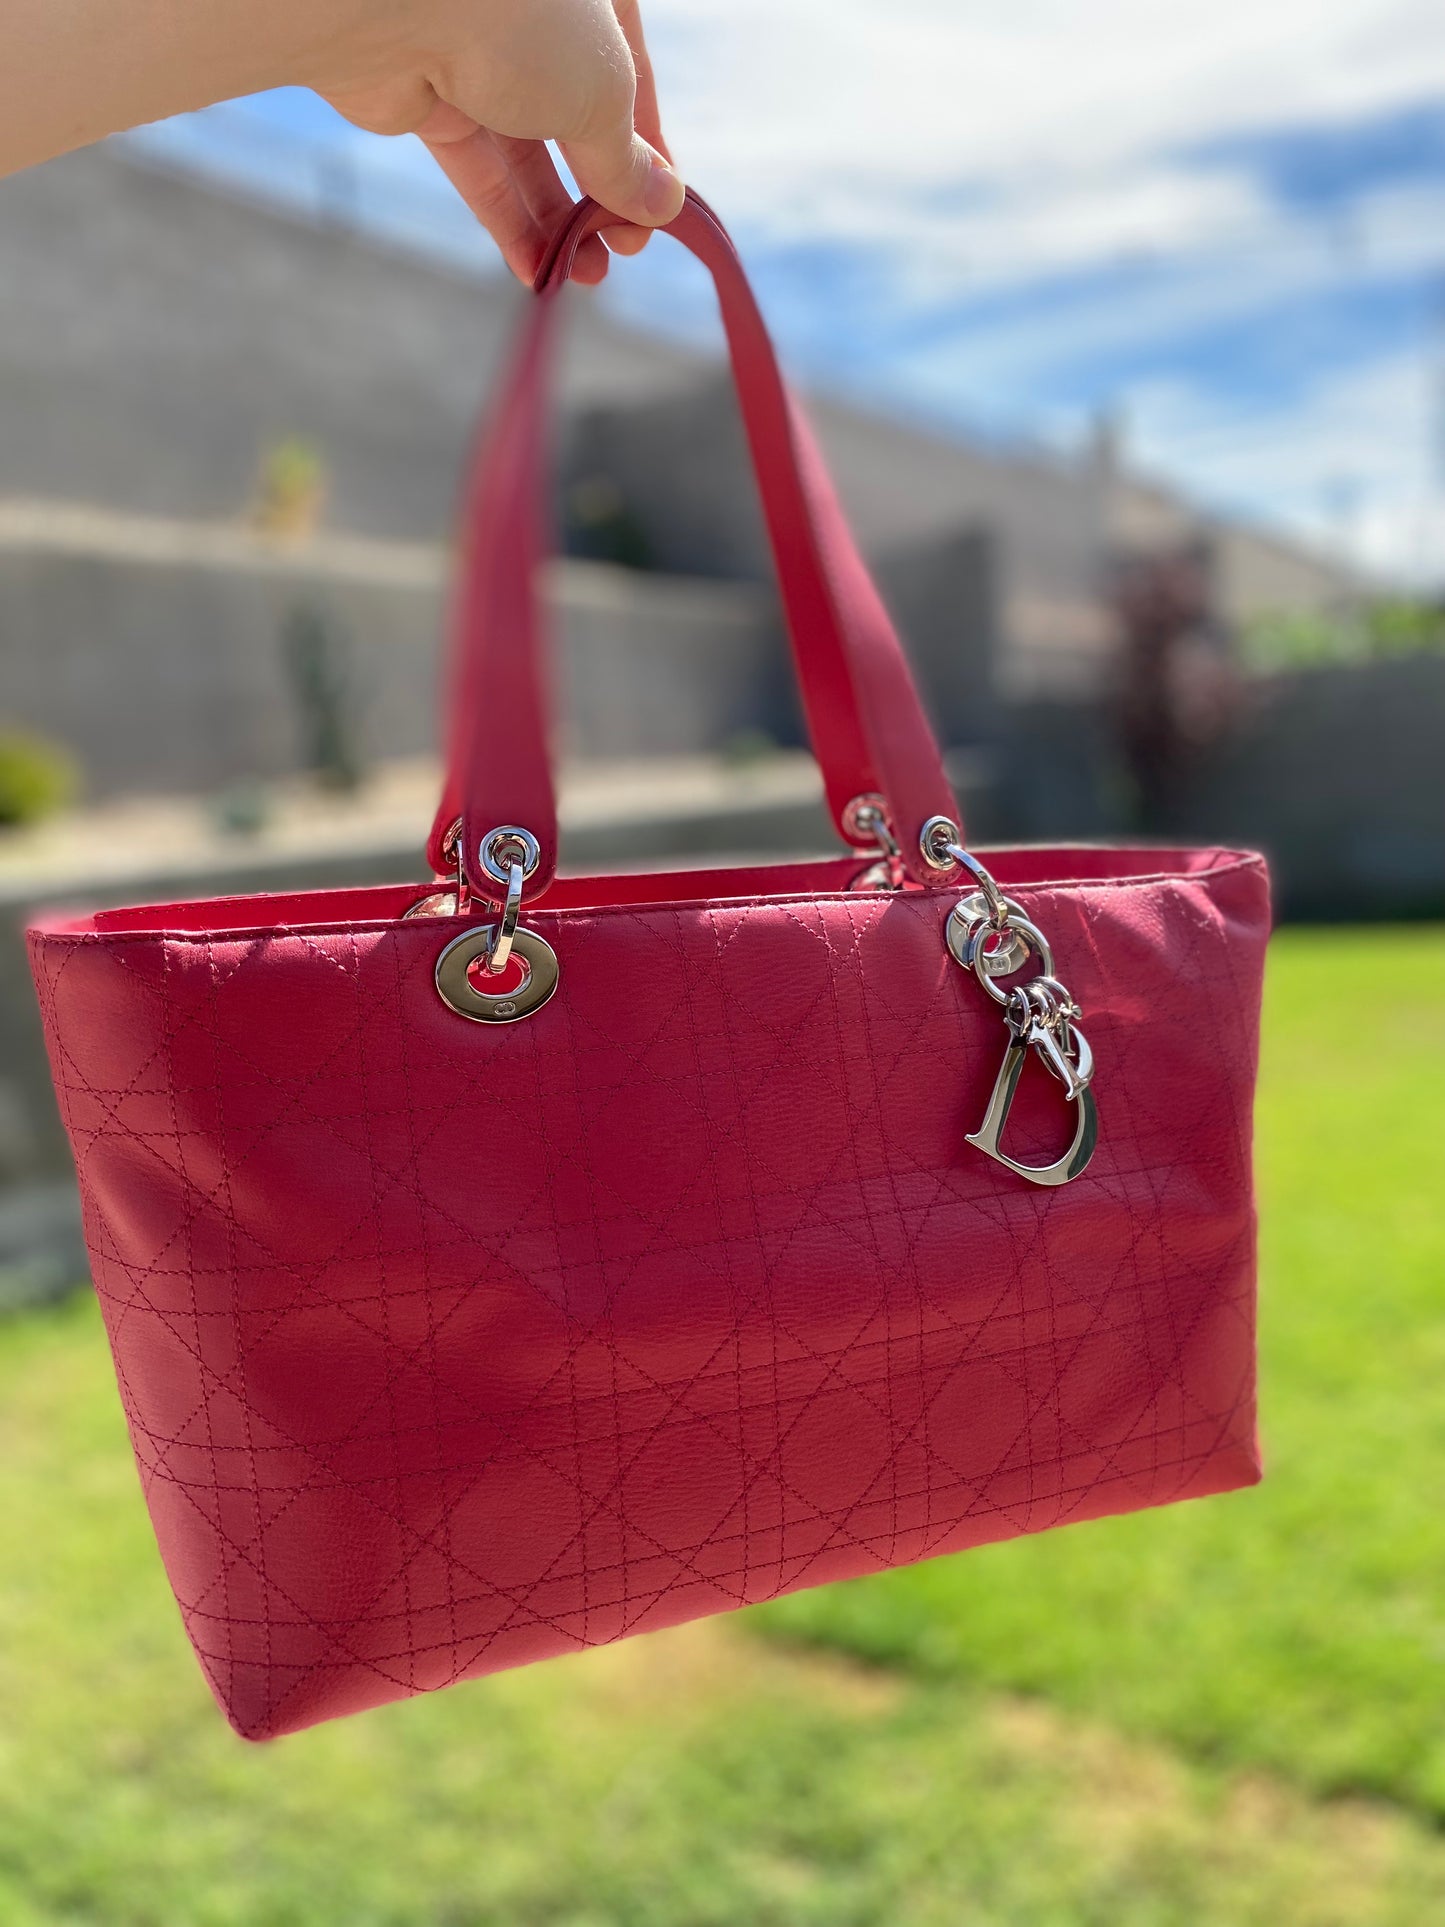 Christian Dior East West Lady Dior Leather Tote